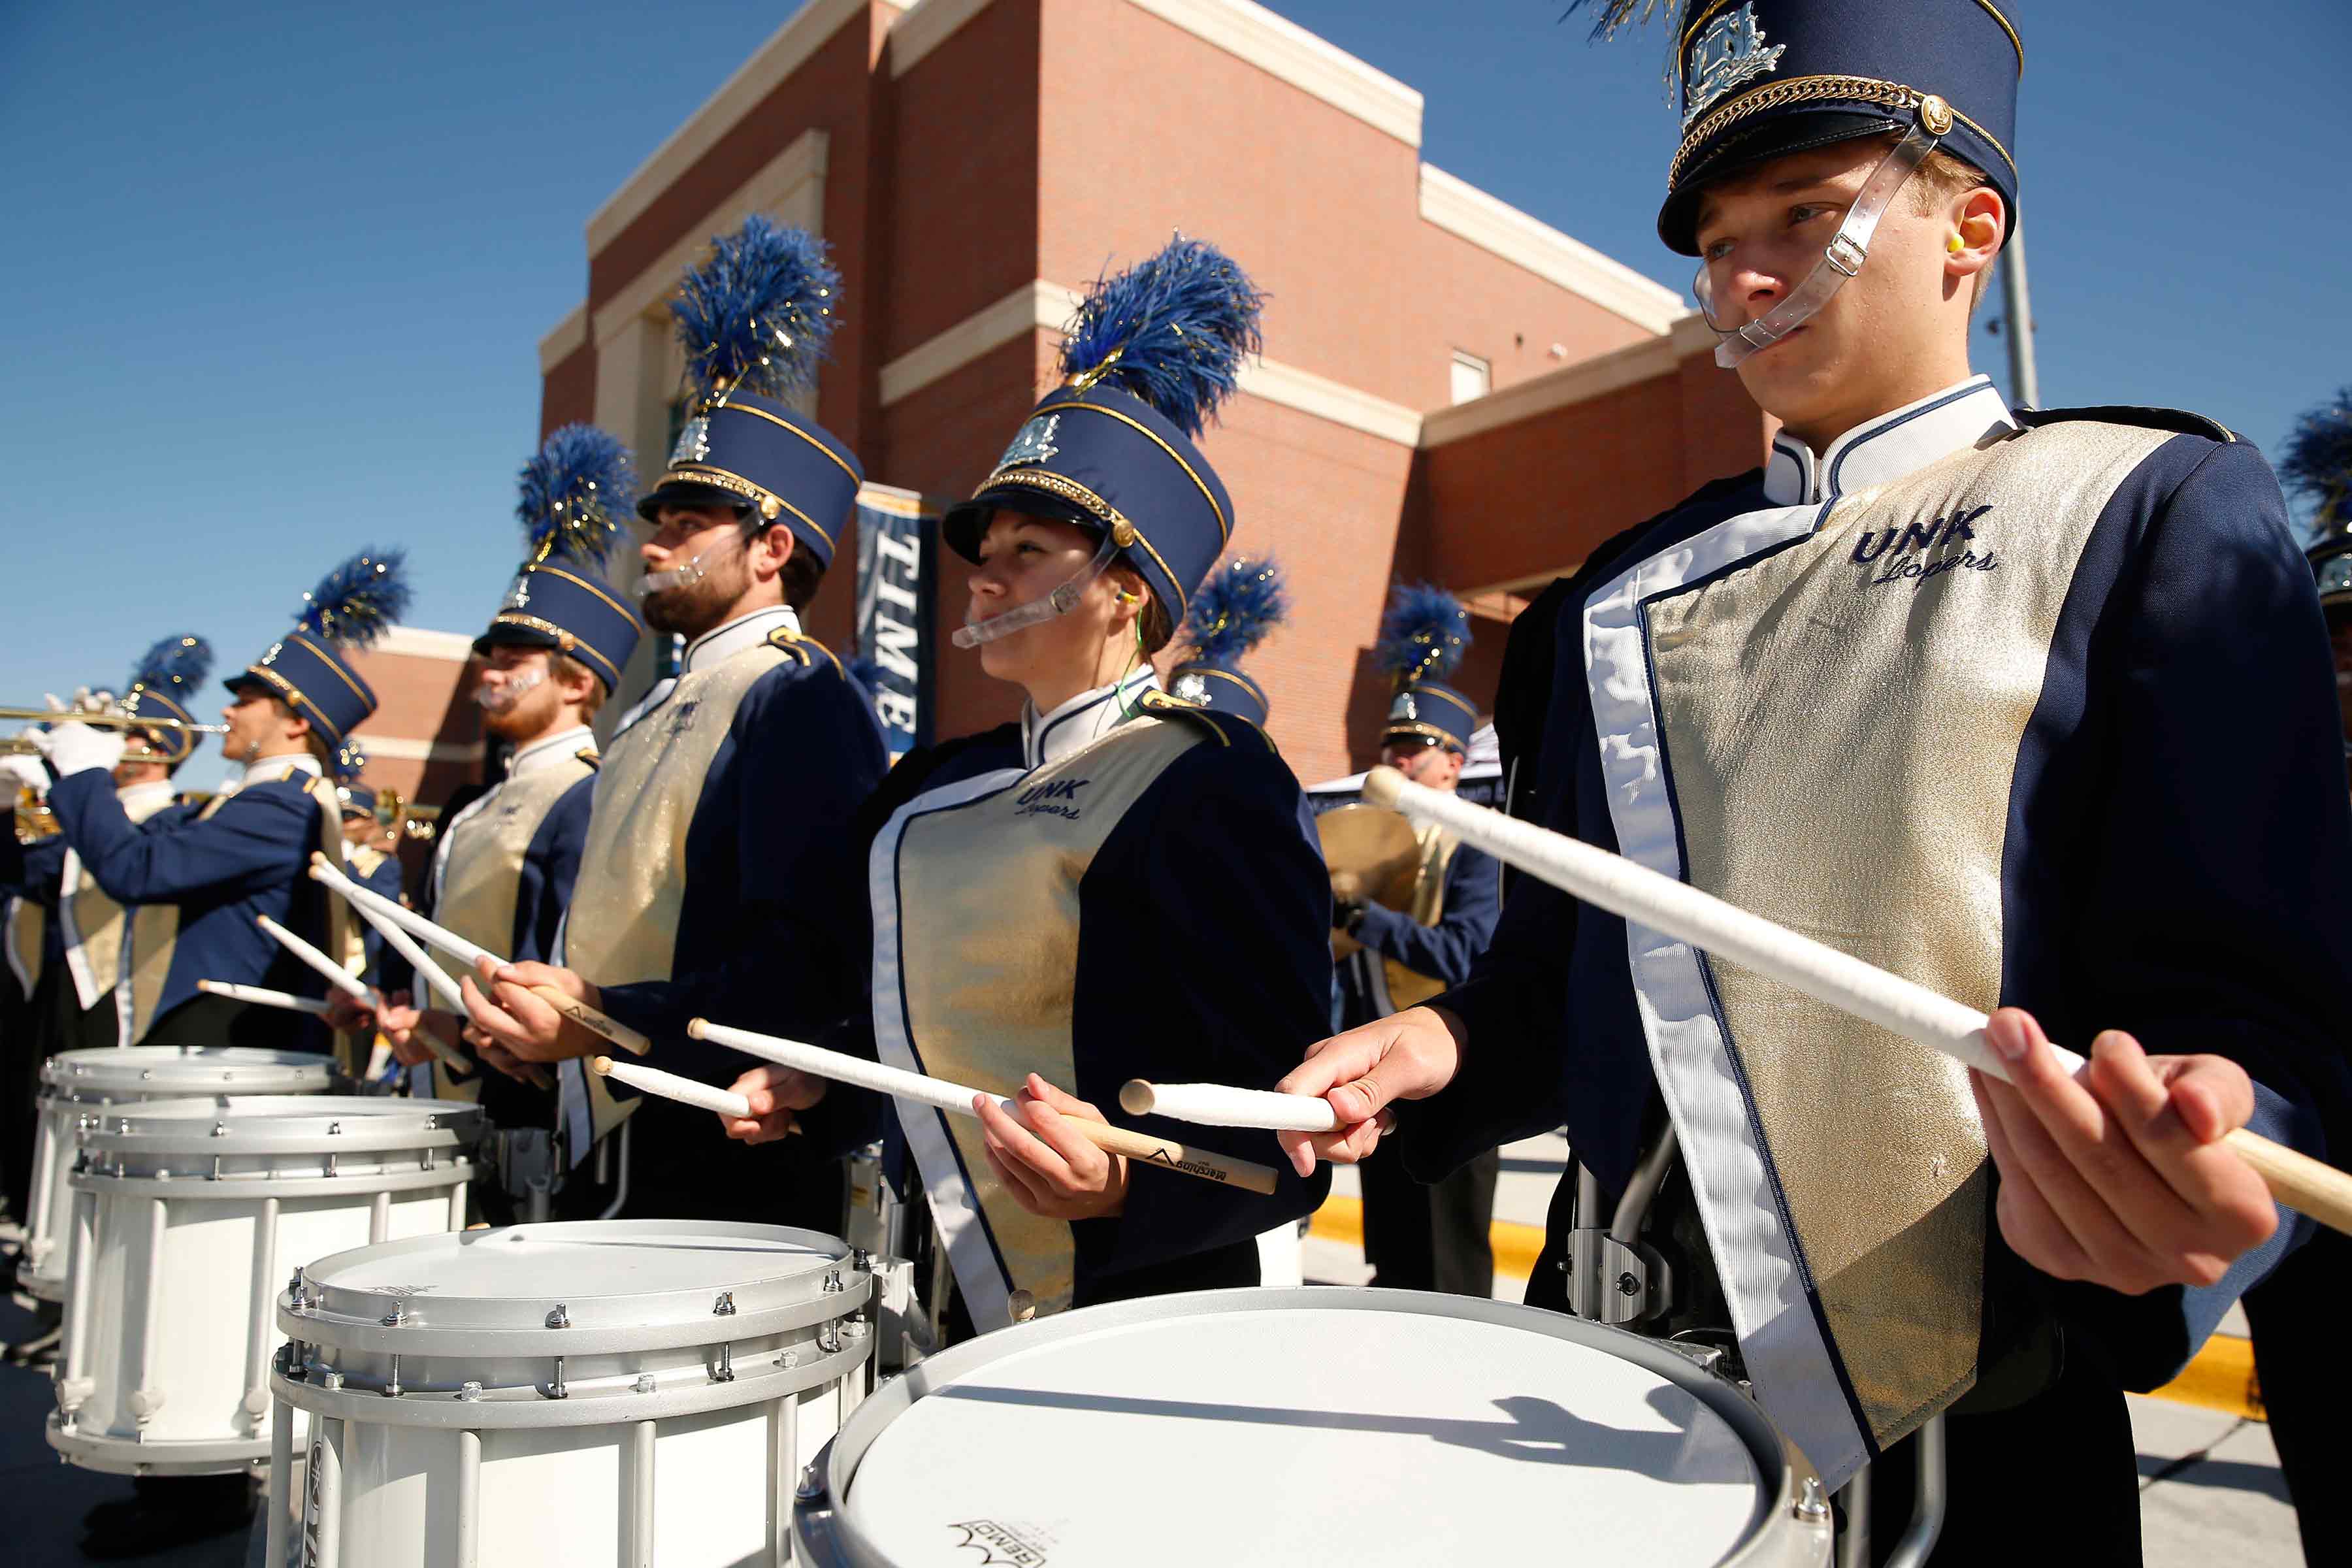 UNK’s Pride of the Plains marching band will play May 17 in two parades in Sandefjord, Norway.